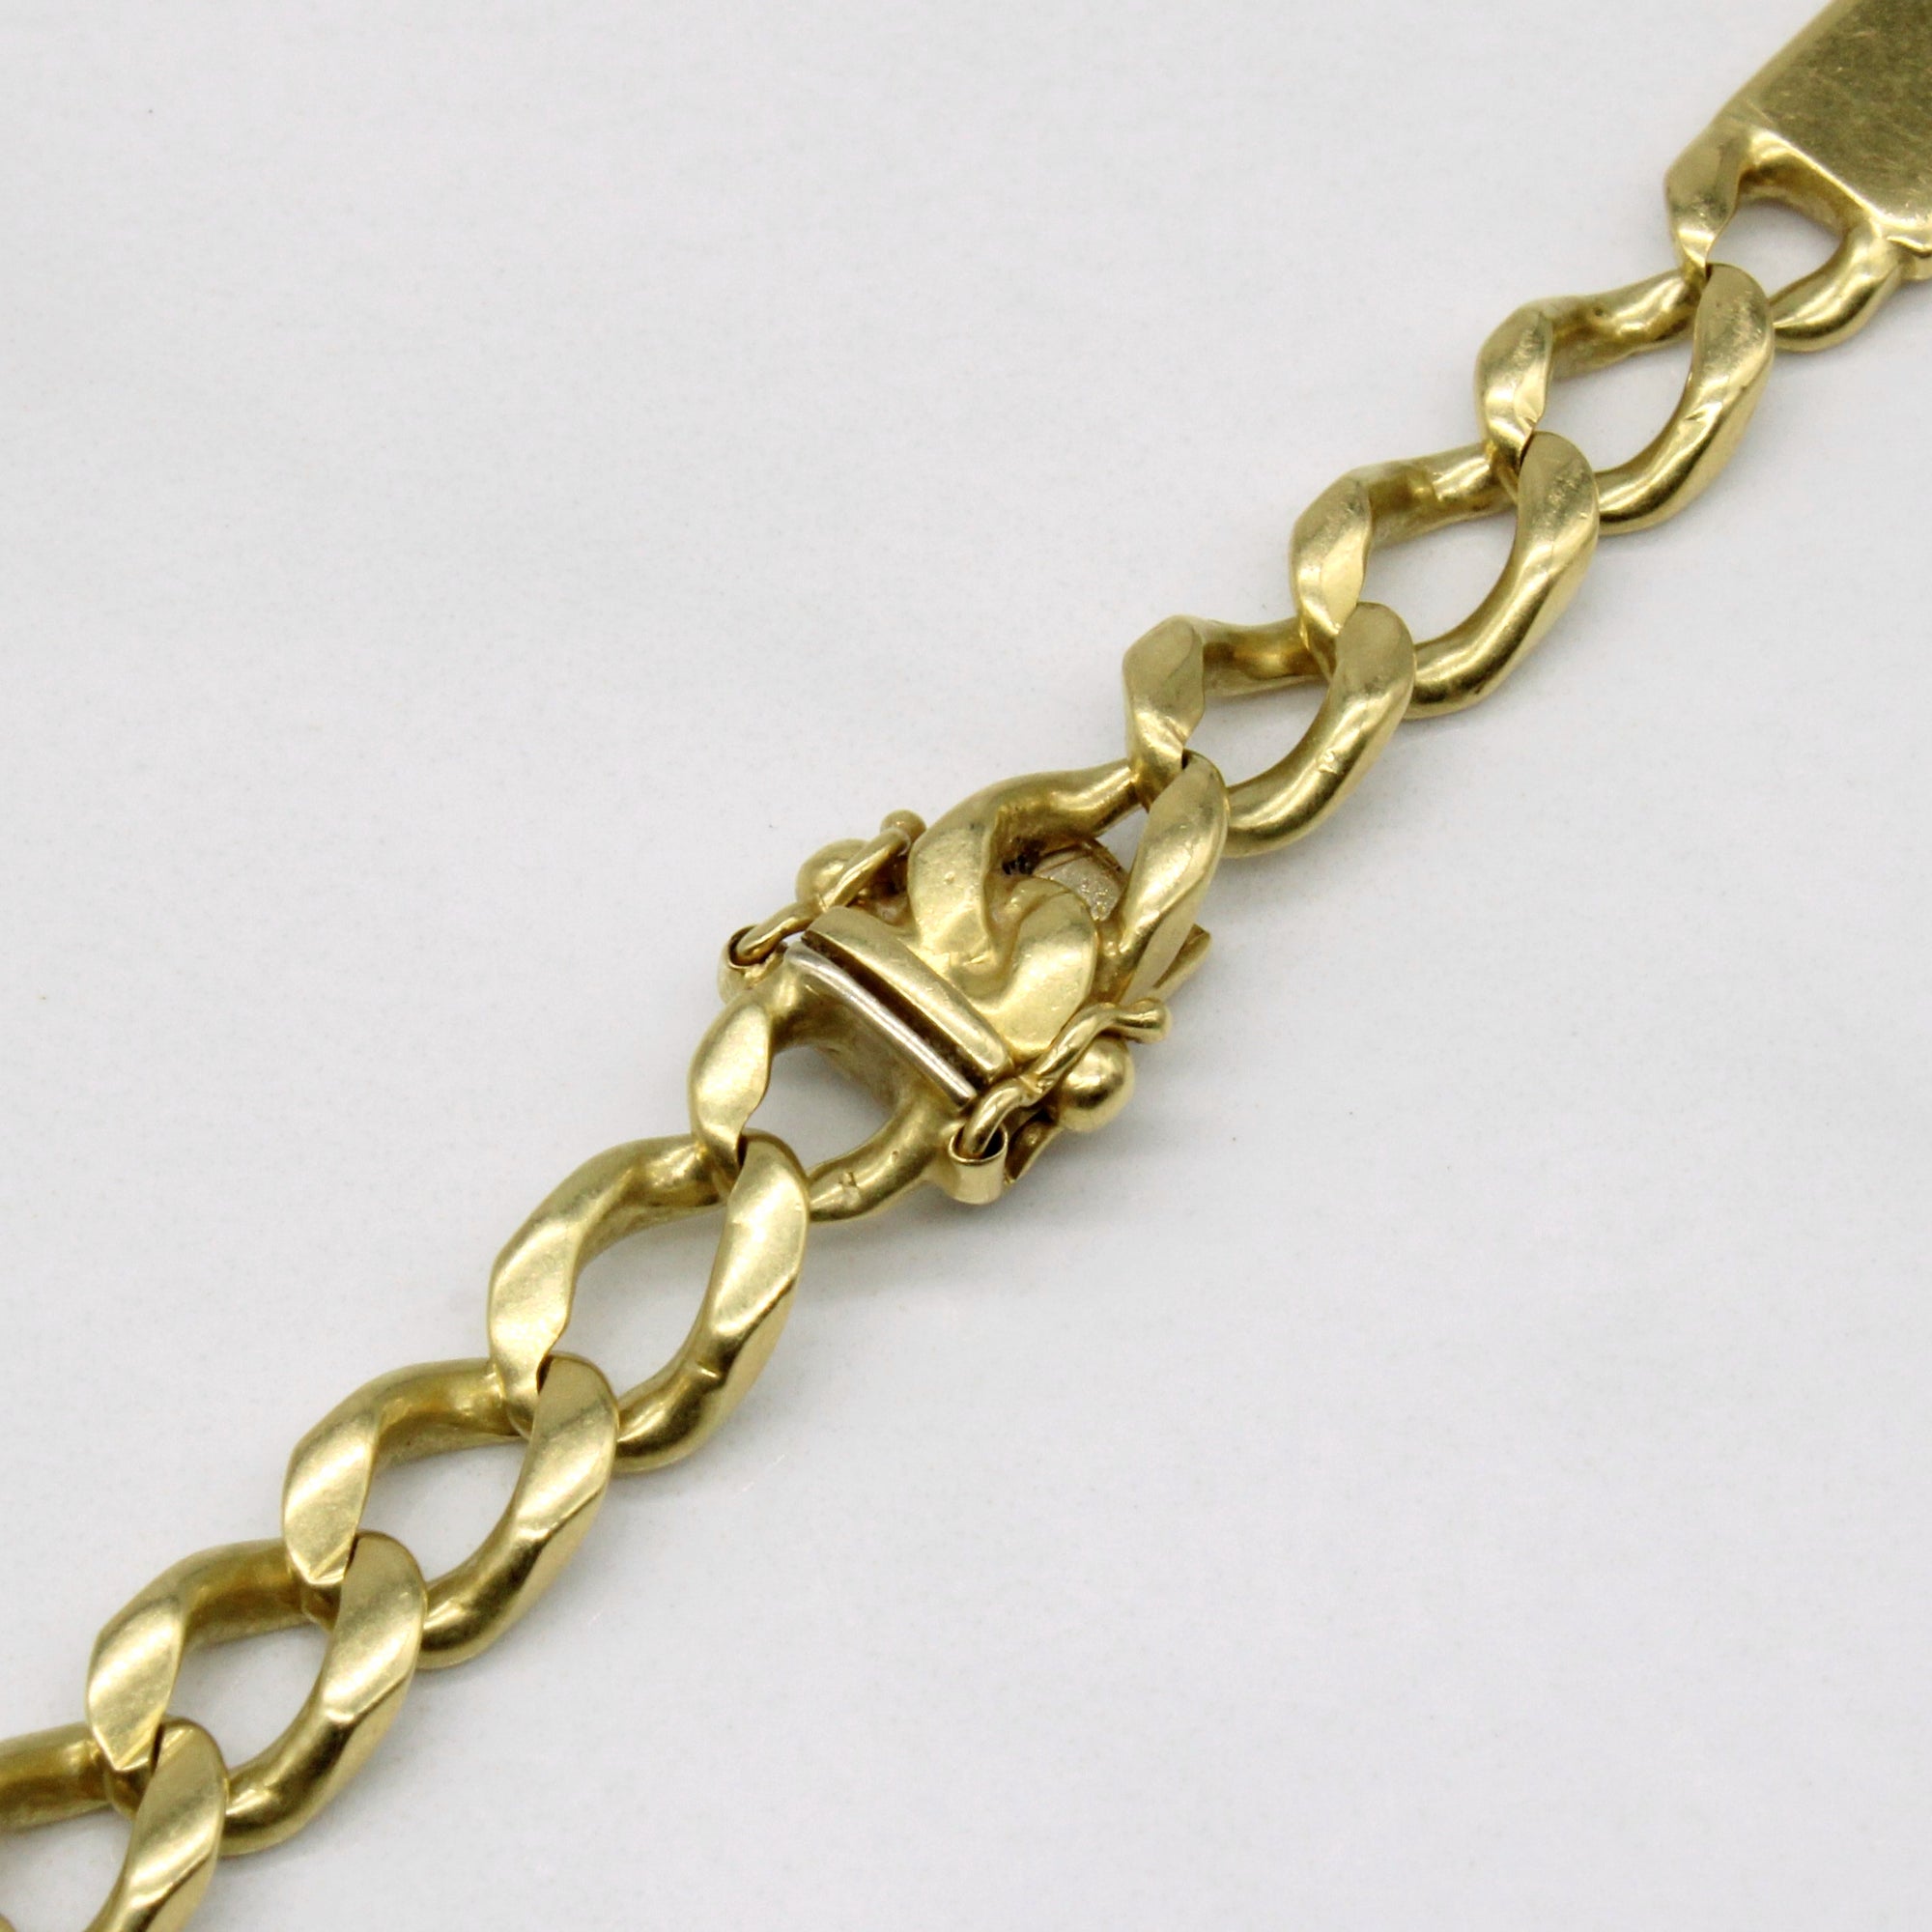 18k Yellow Gold Curb Link Chain | 22